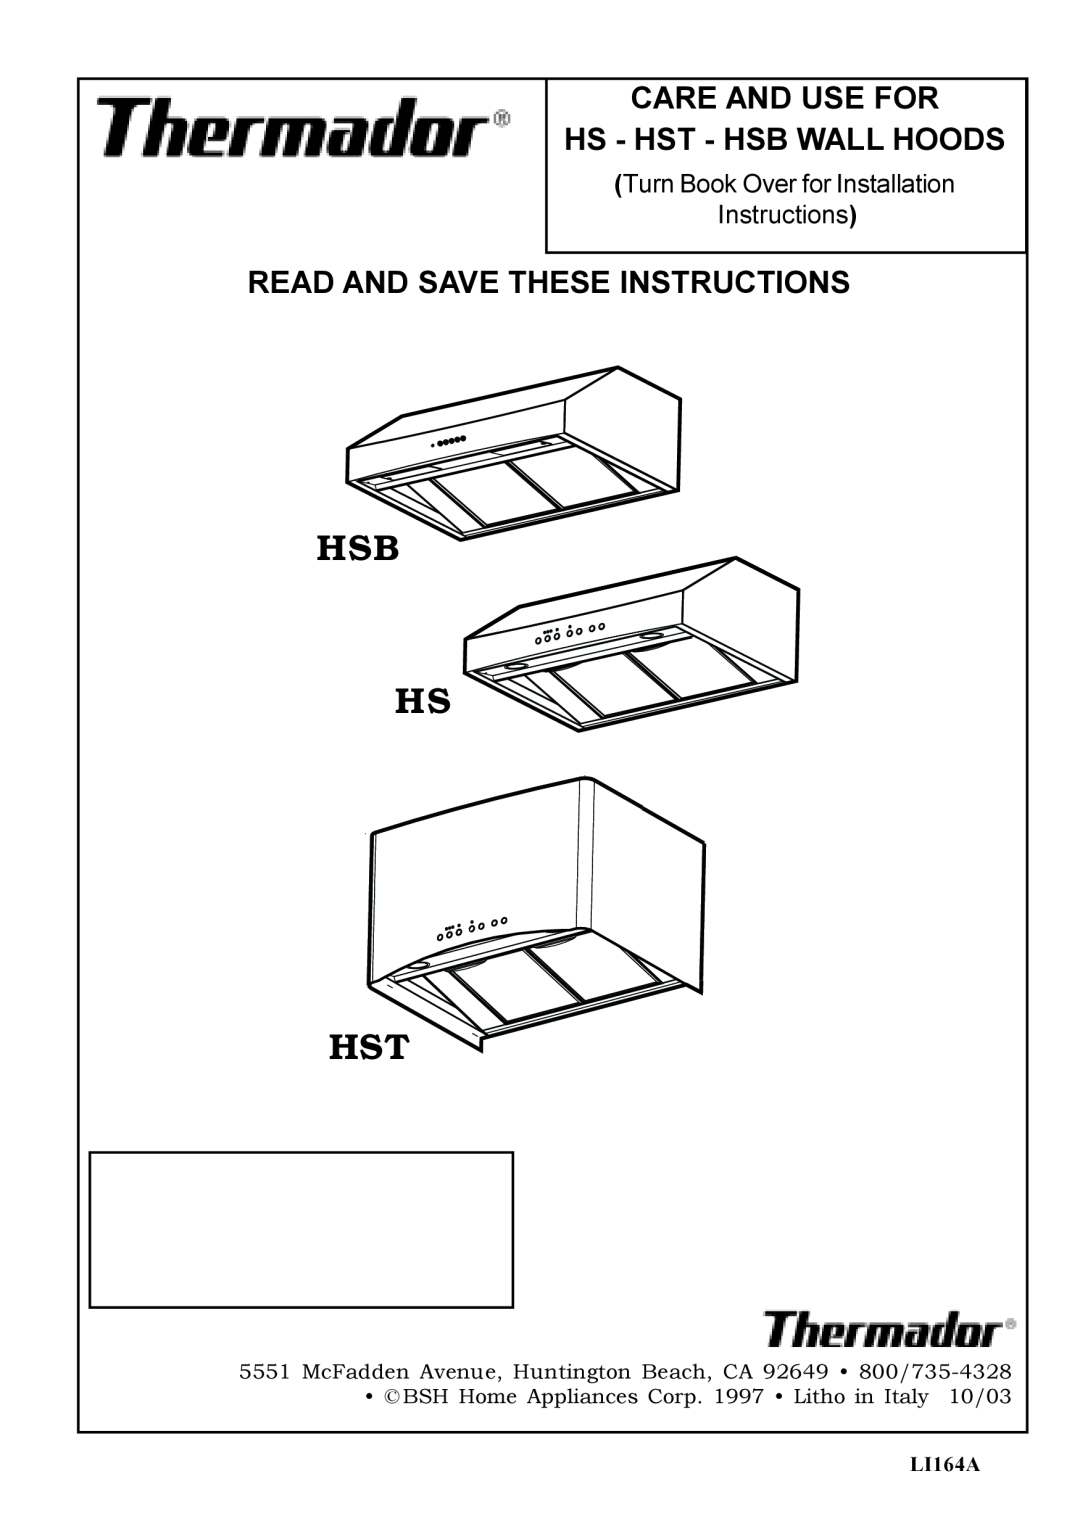 Thermador HSB, HST installation instructions Care And Use For, Hs - Hst - Hsb Wall Hoods, Read And Save These Instructions 